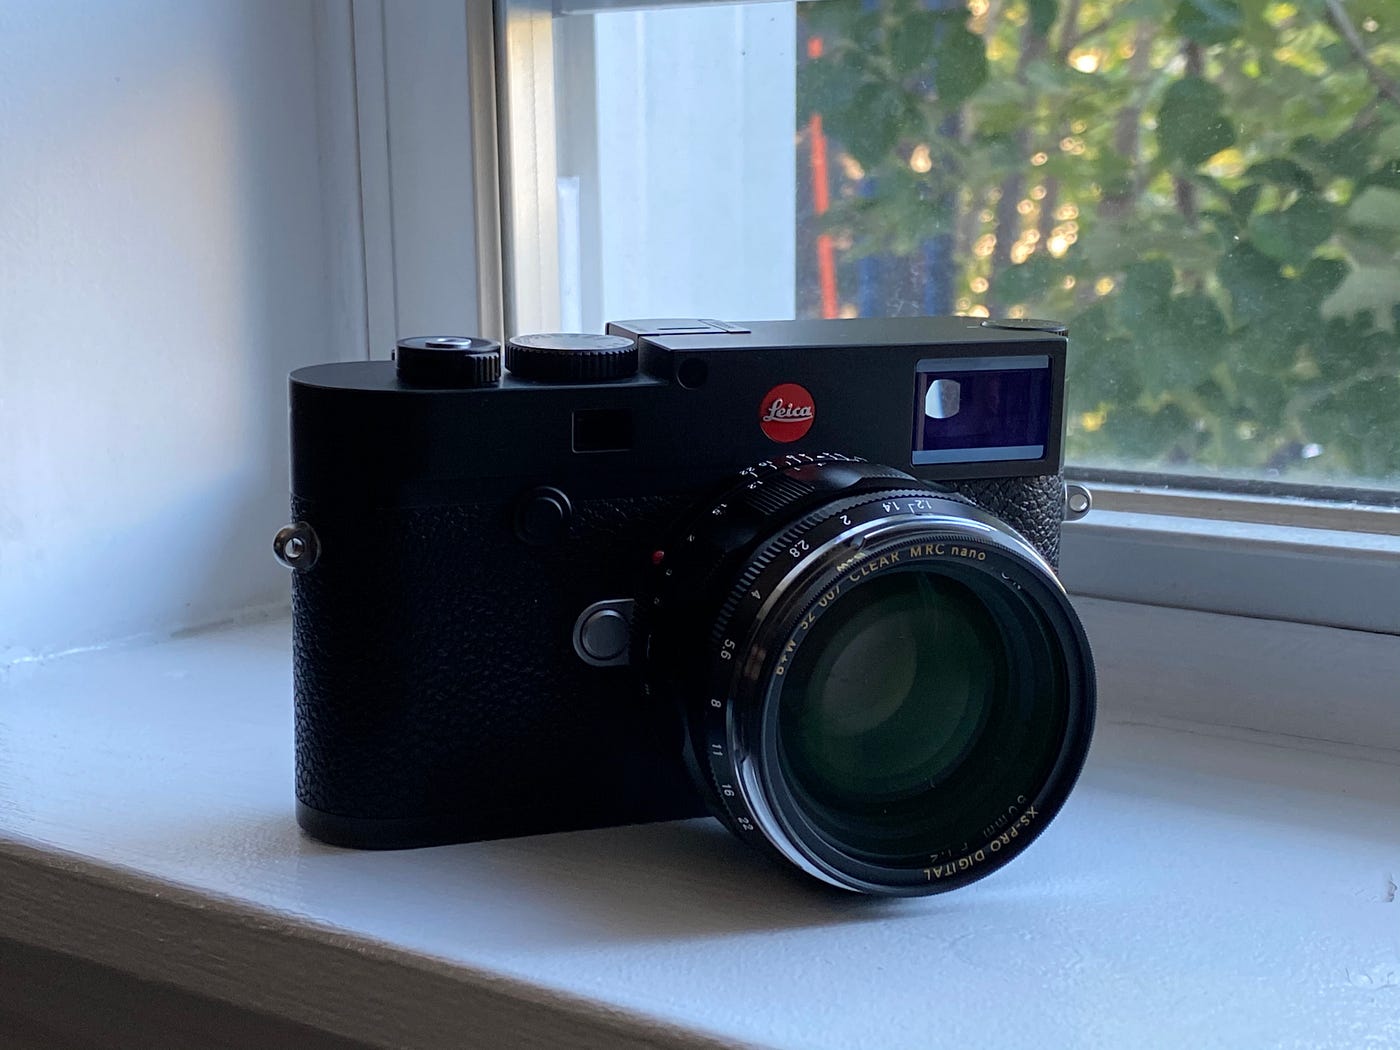 My Summer with the Leica M10: From a Fuji and Sony User Perspective, by  Peter Price